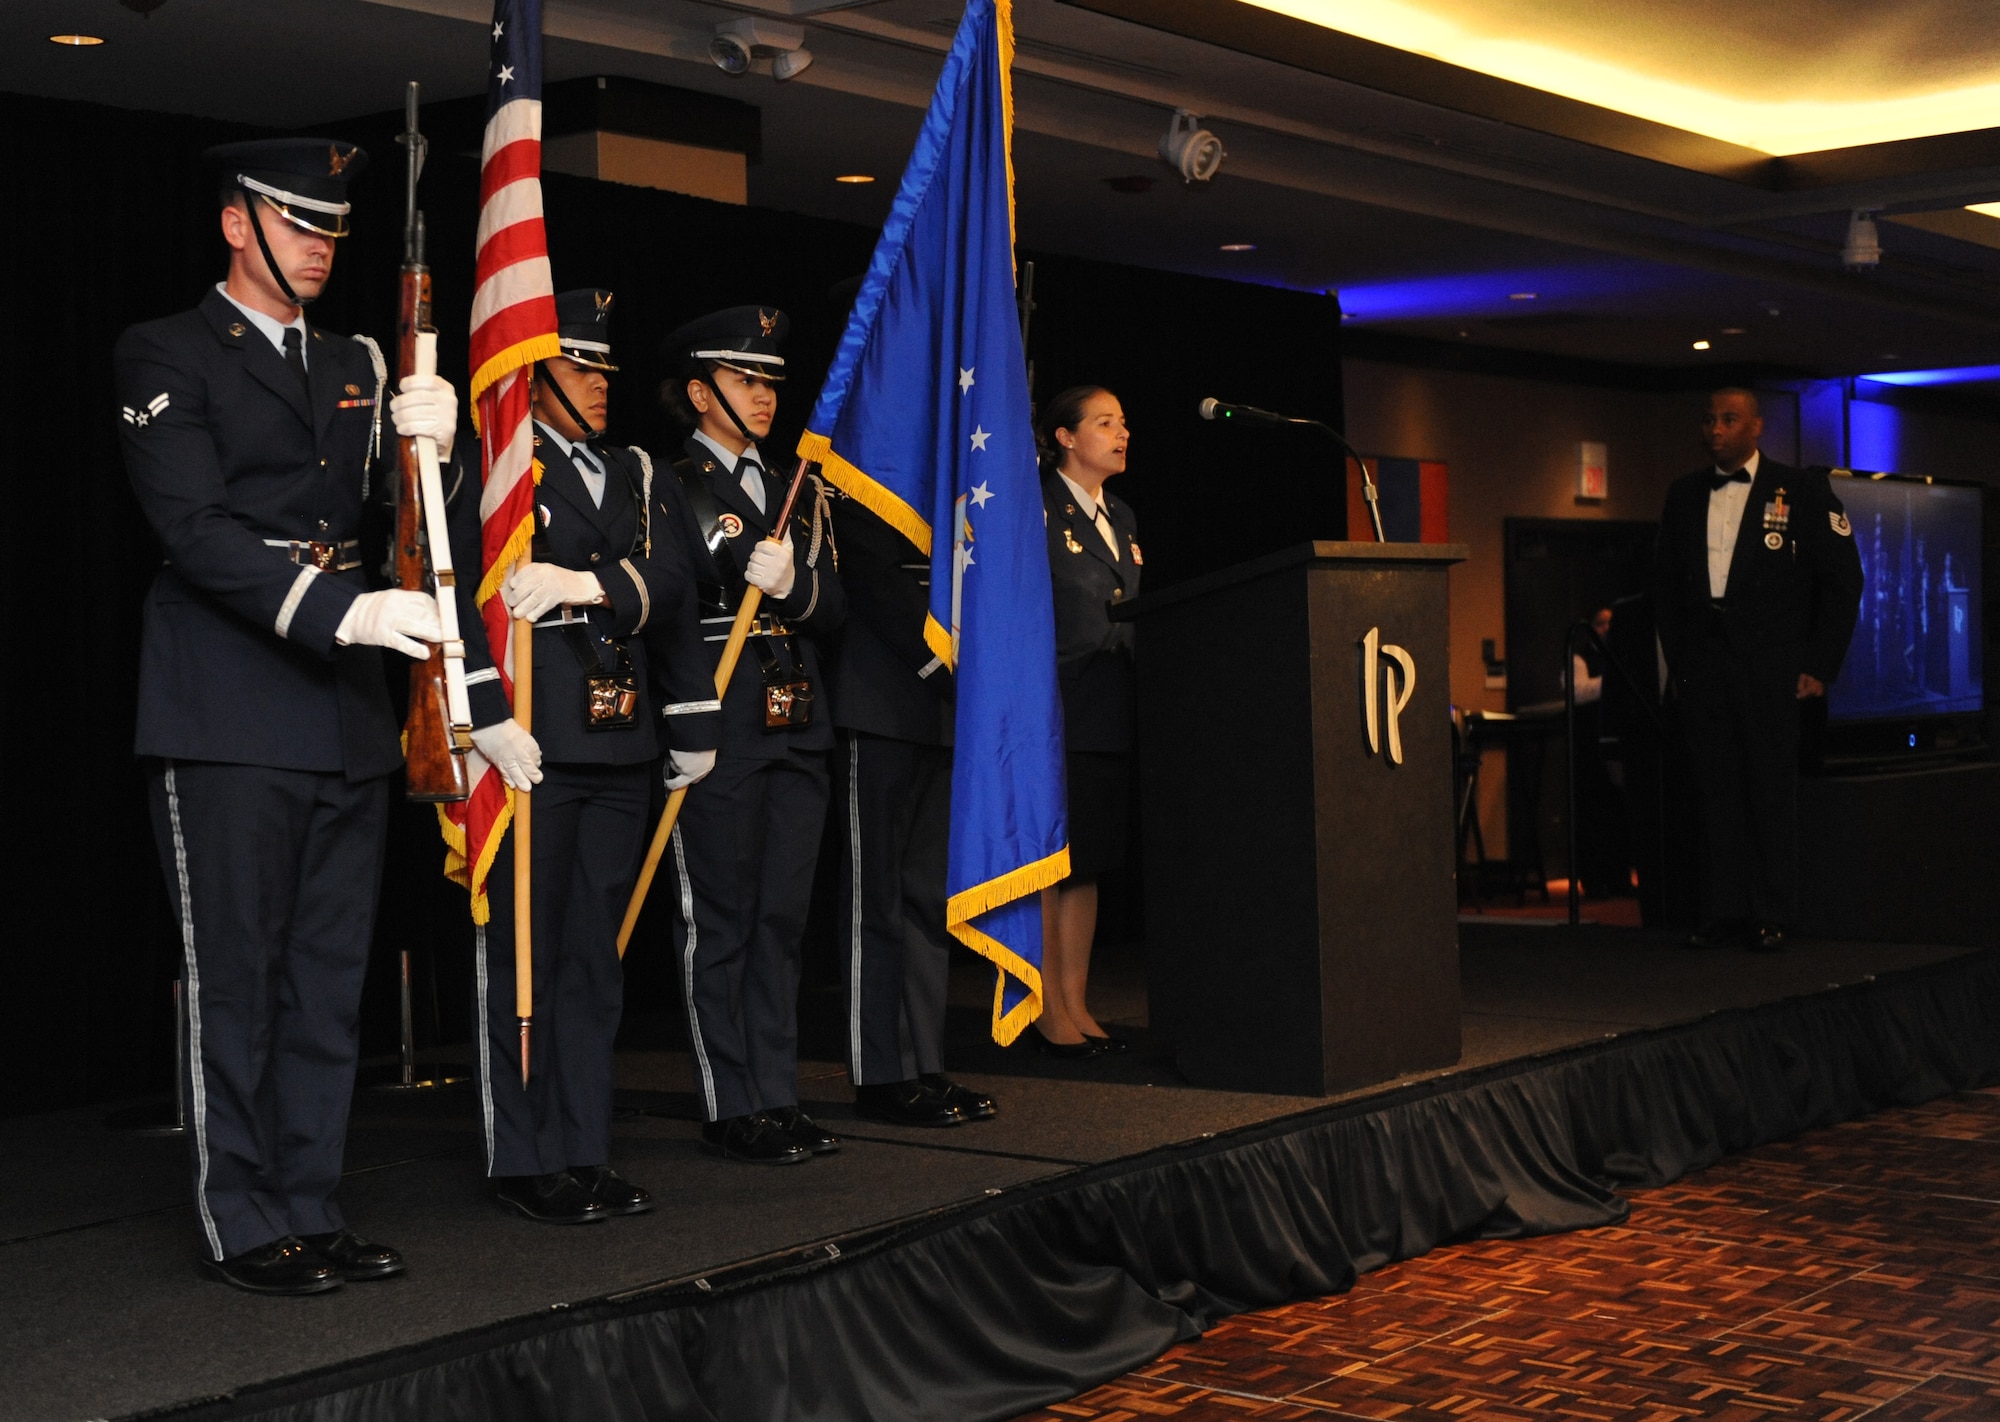 Members of the Keesler Air Force Base Honor Guard present the colors during the playing of the national anthem during the Keesler Air Force Ball at the Imperial Palace Casino Sept. 24, 2016, Biloxi, Miss. The event was sponsored by the Air Force Association John C. Stennis Chapter #332 to celebrate the Air Force’s 69th birthday and the base’s 75th anniversary. (U.S. Air Force photo by Kemberly Groue/Released)